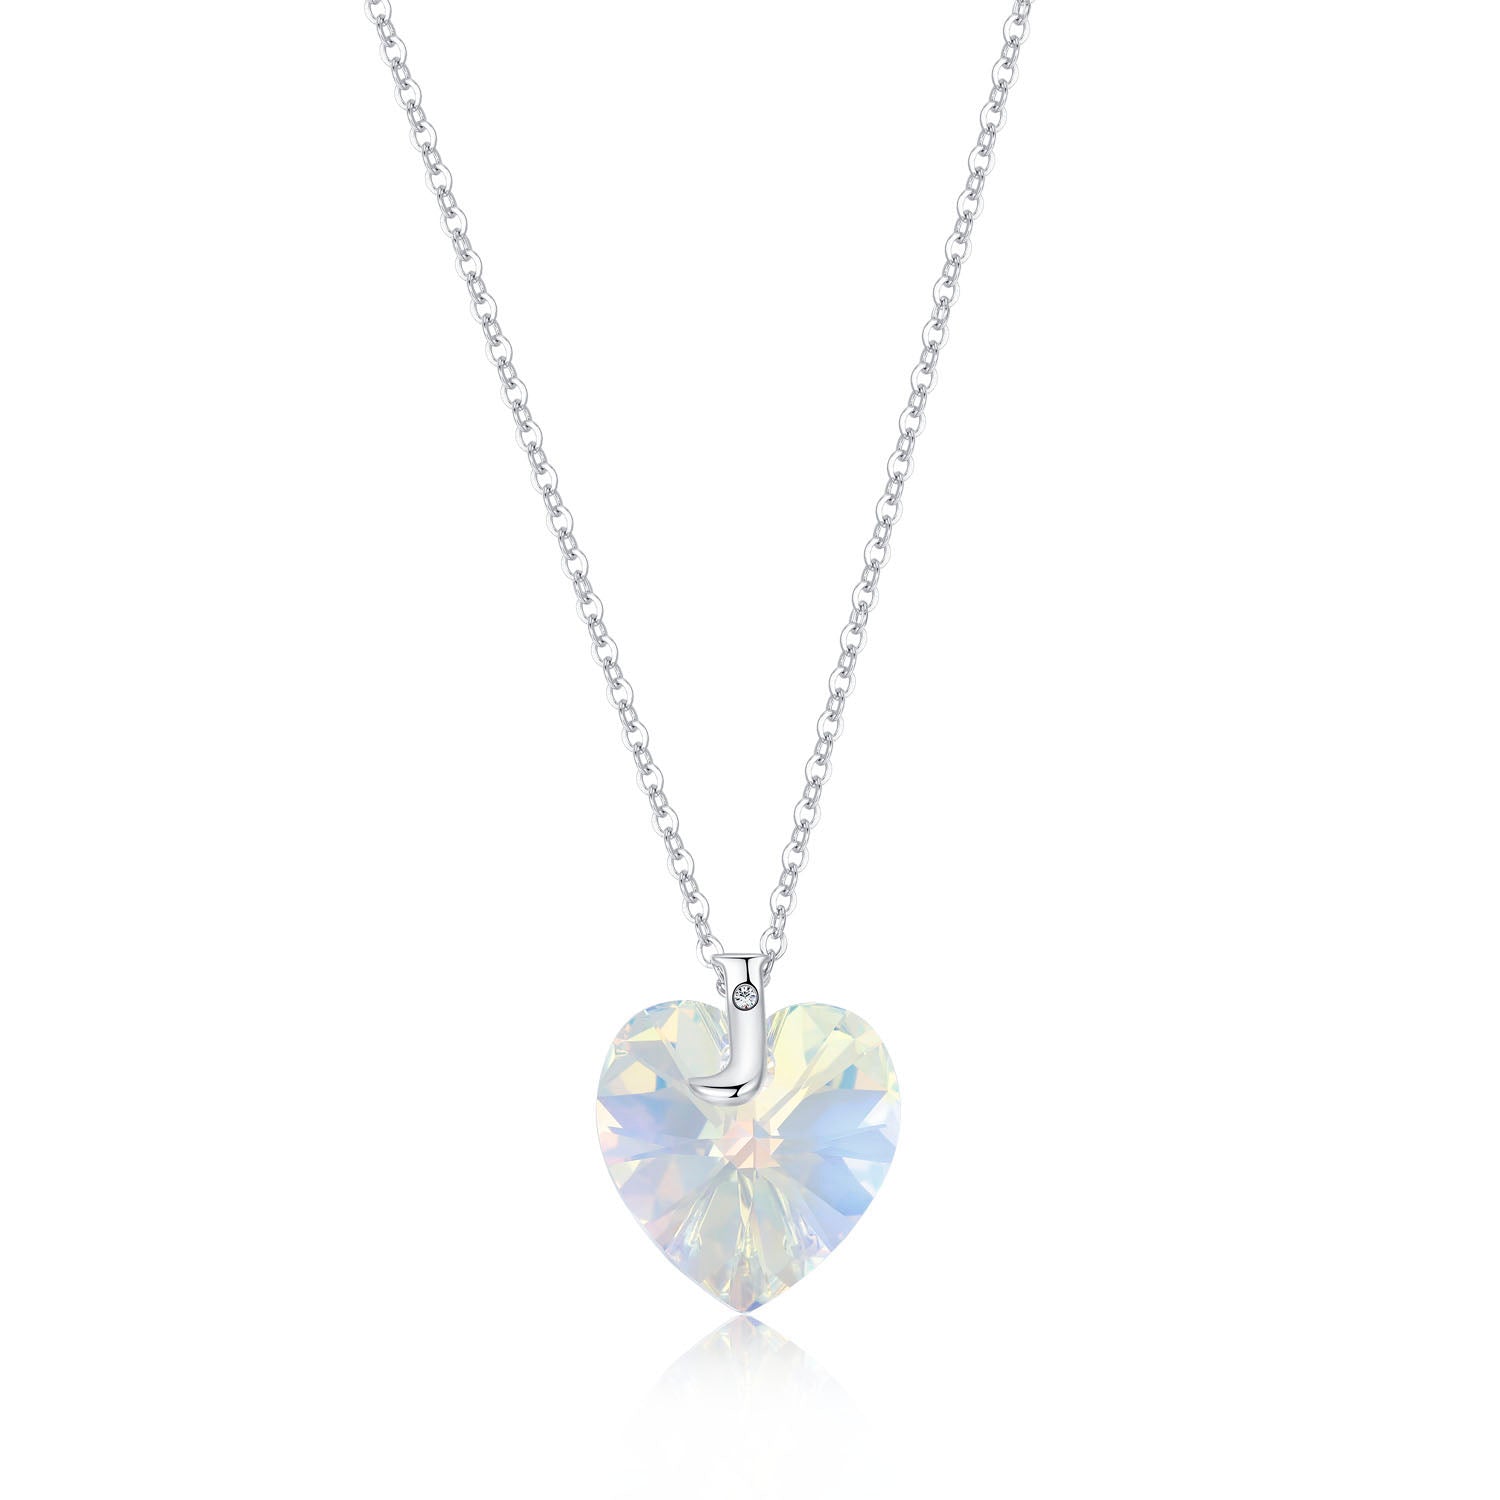 Planet J 925 Sterling Silver Heart Pendant Necklace with Swarovski Element Crystals